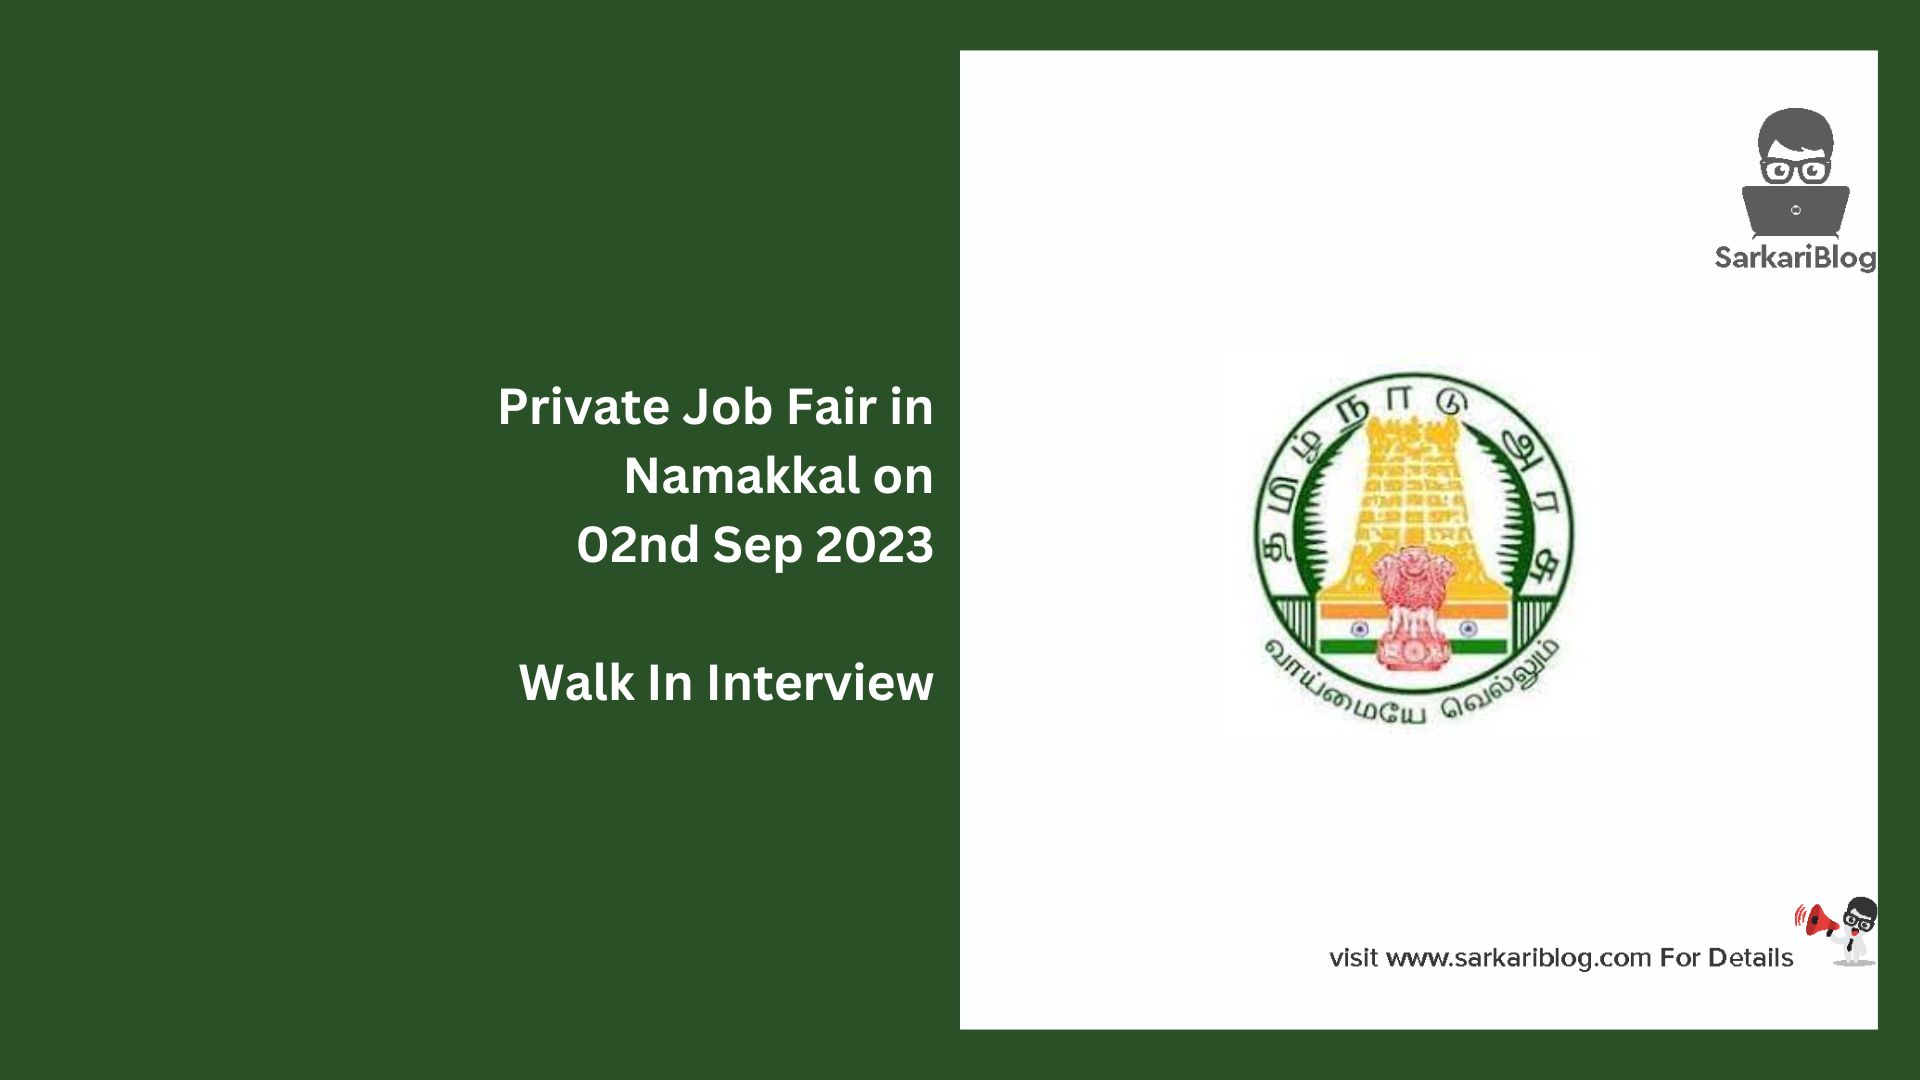 Private Job Fair in Namakkal on 02nd Sep 2023